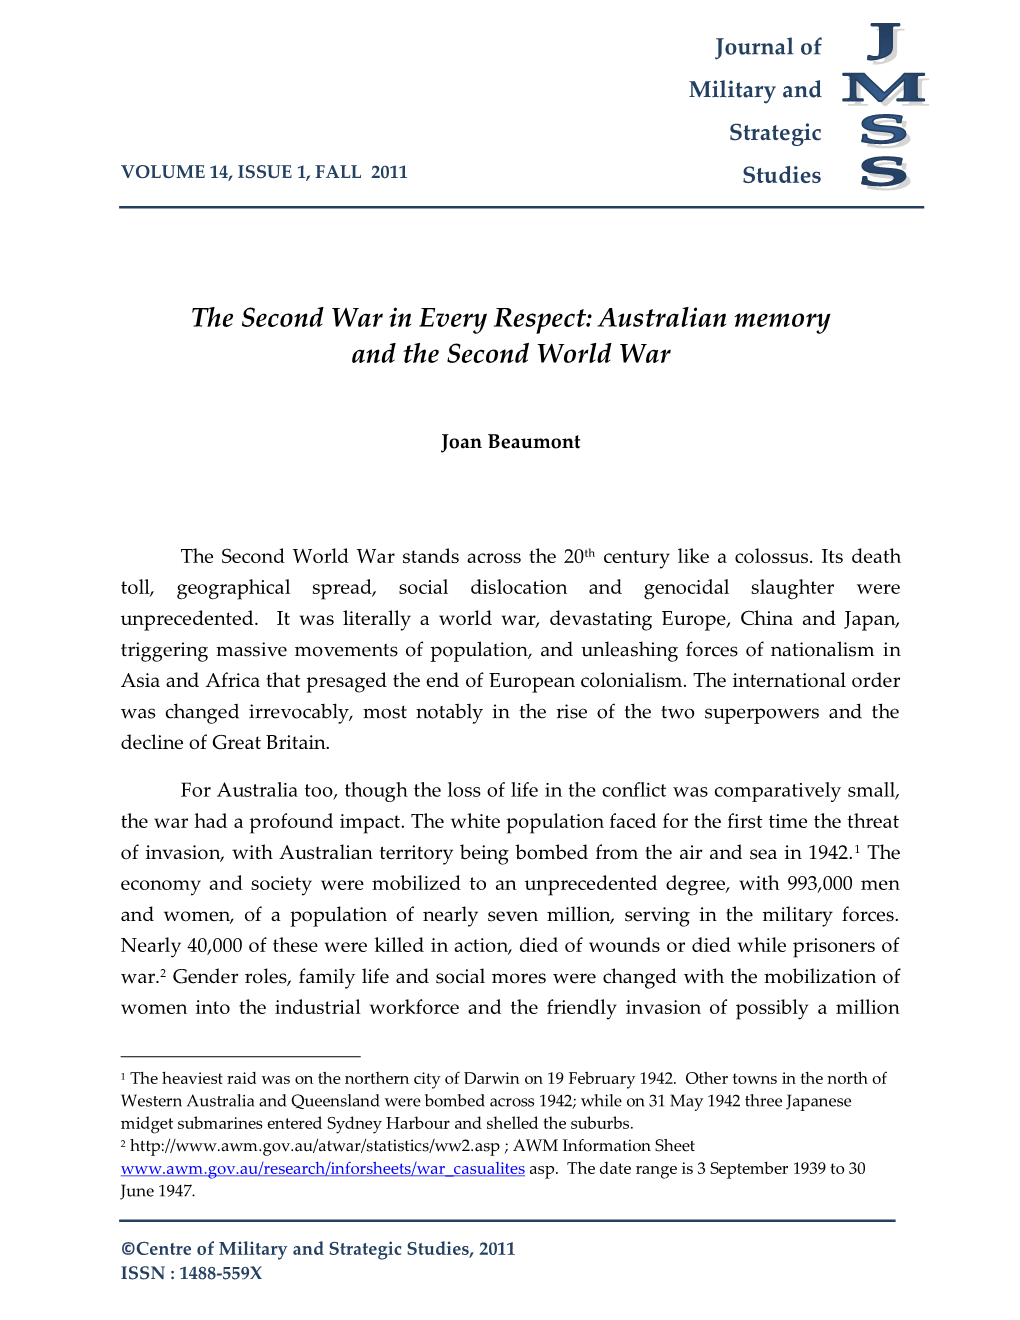 Australian Memory and the Second World War